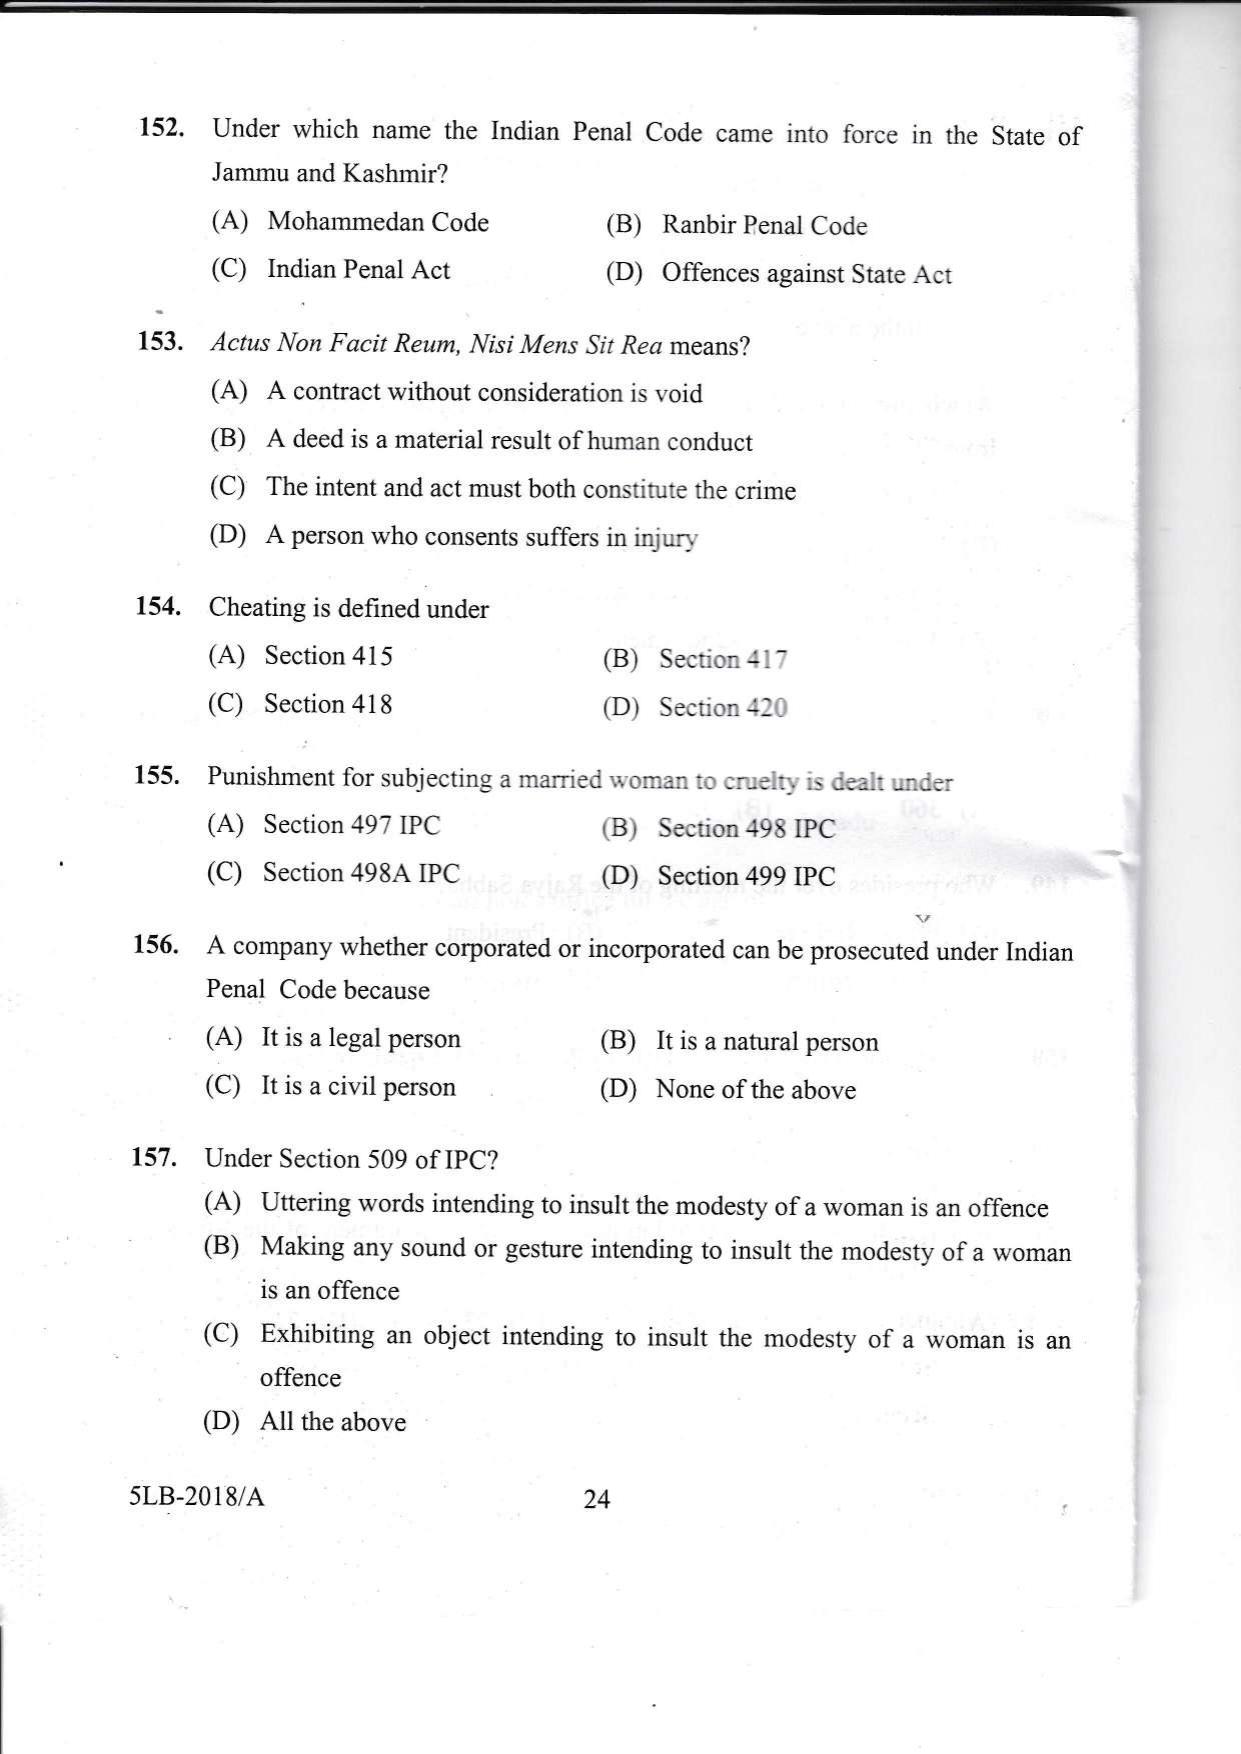 KLEE 5 Year LLB Exam 2018 Question Paper - Page 24